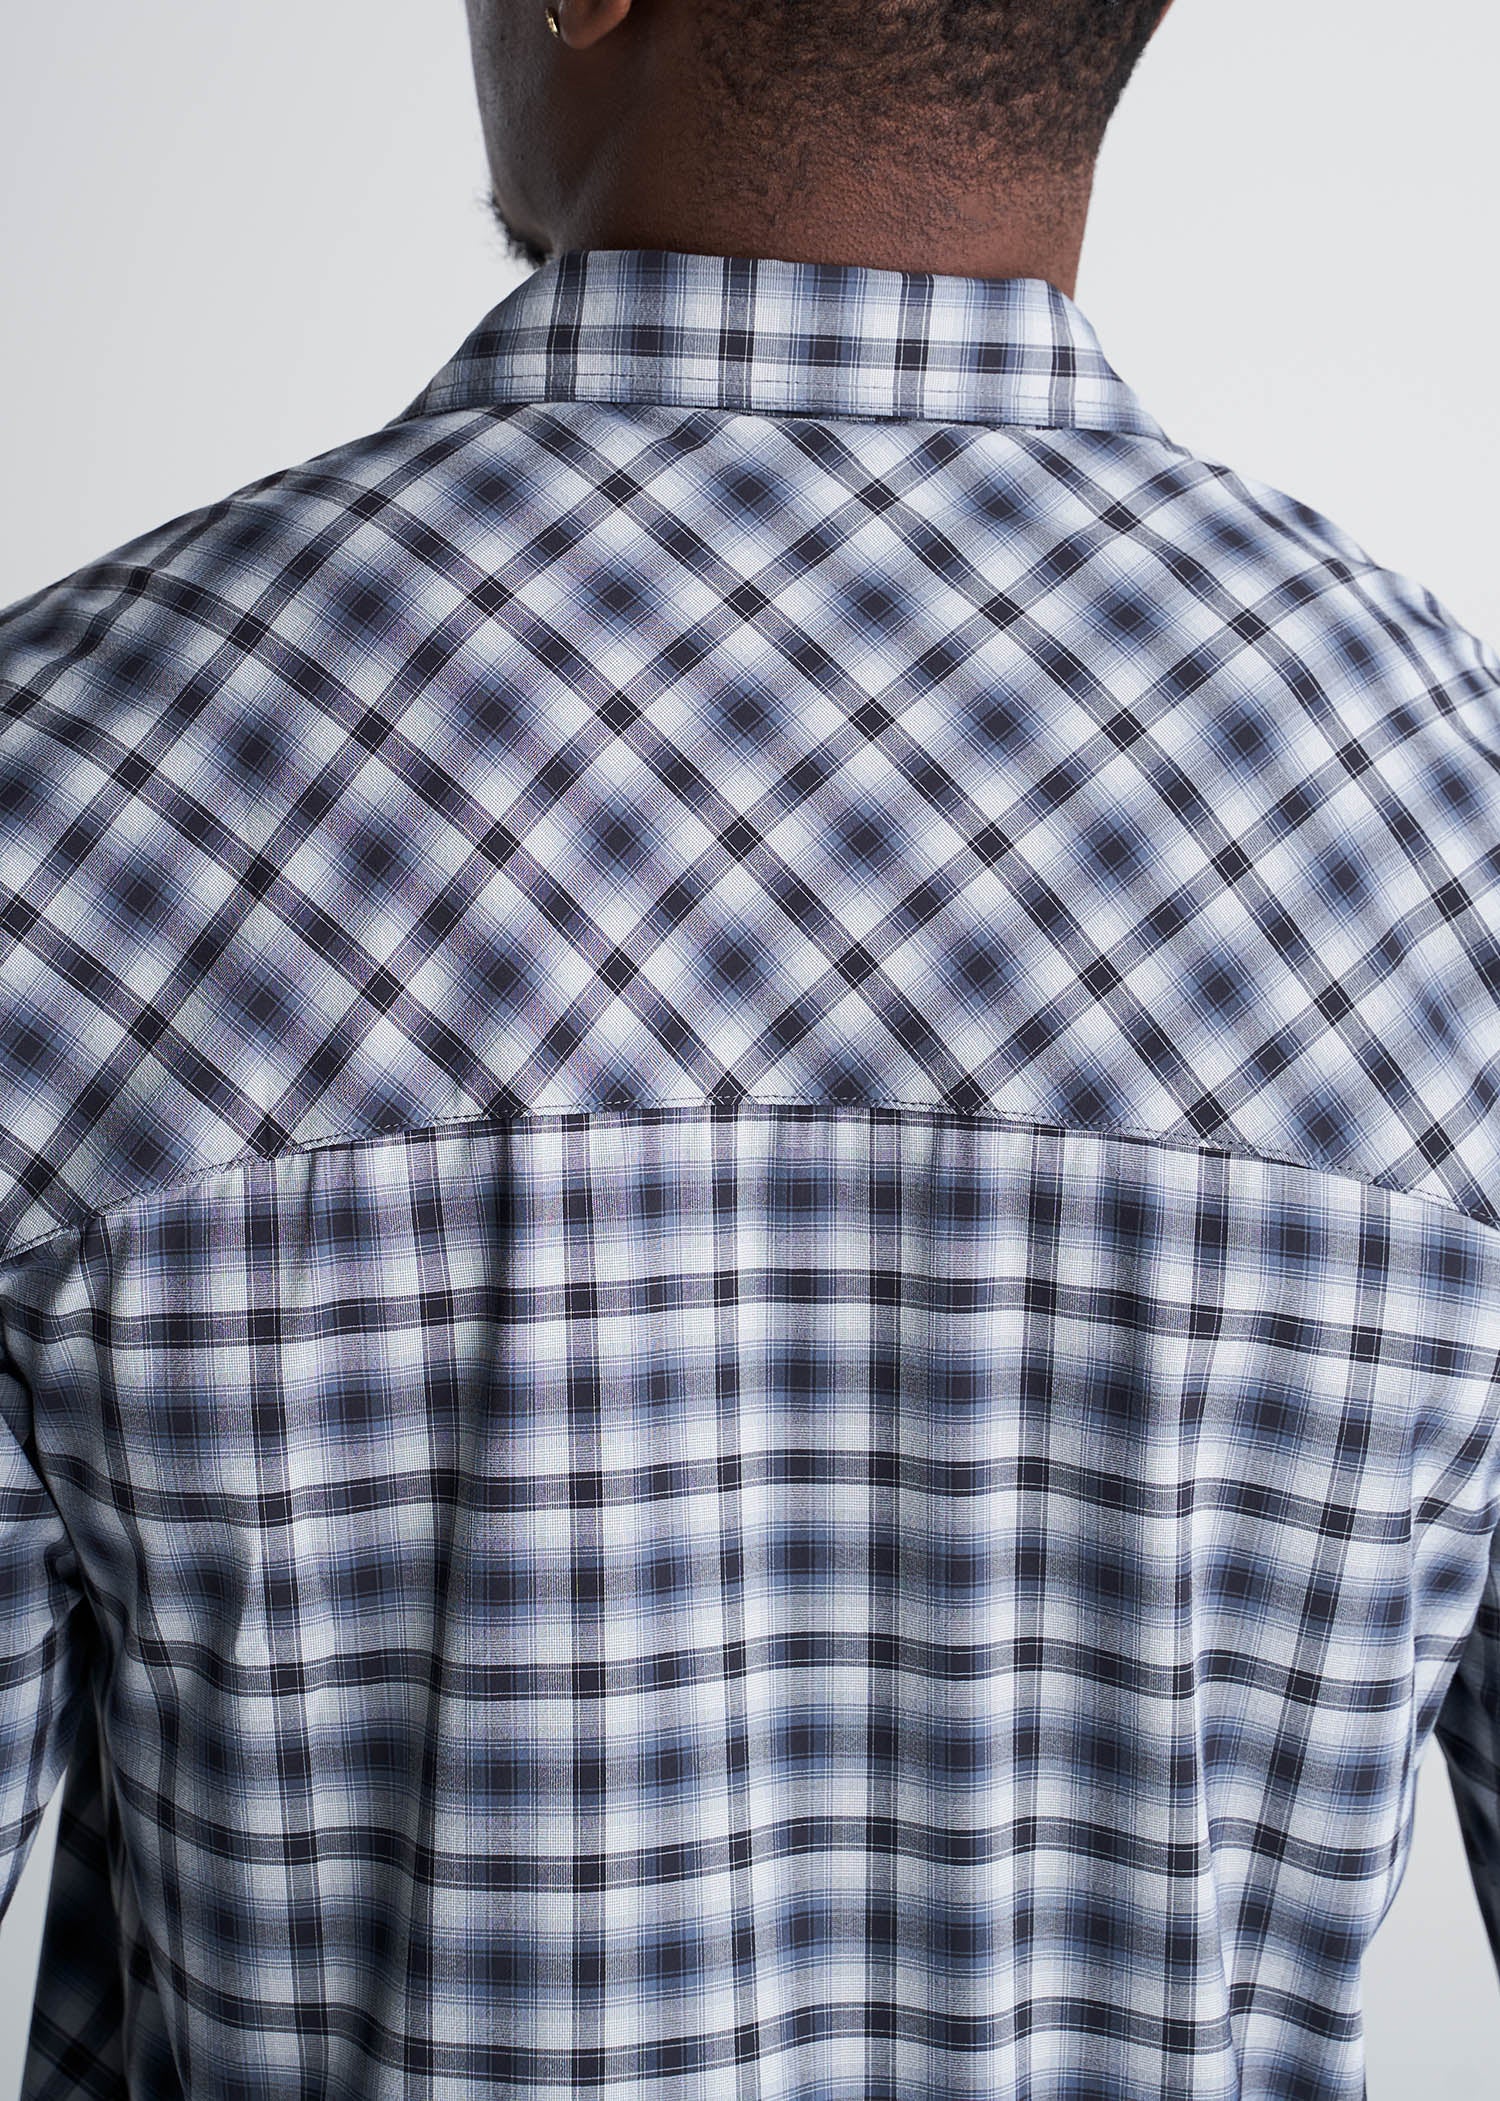 American_Tall_Mens_Hiking_Longsleeve_Button_Up_MidnightCanyon-BackDetail